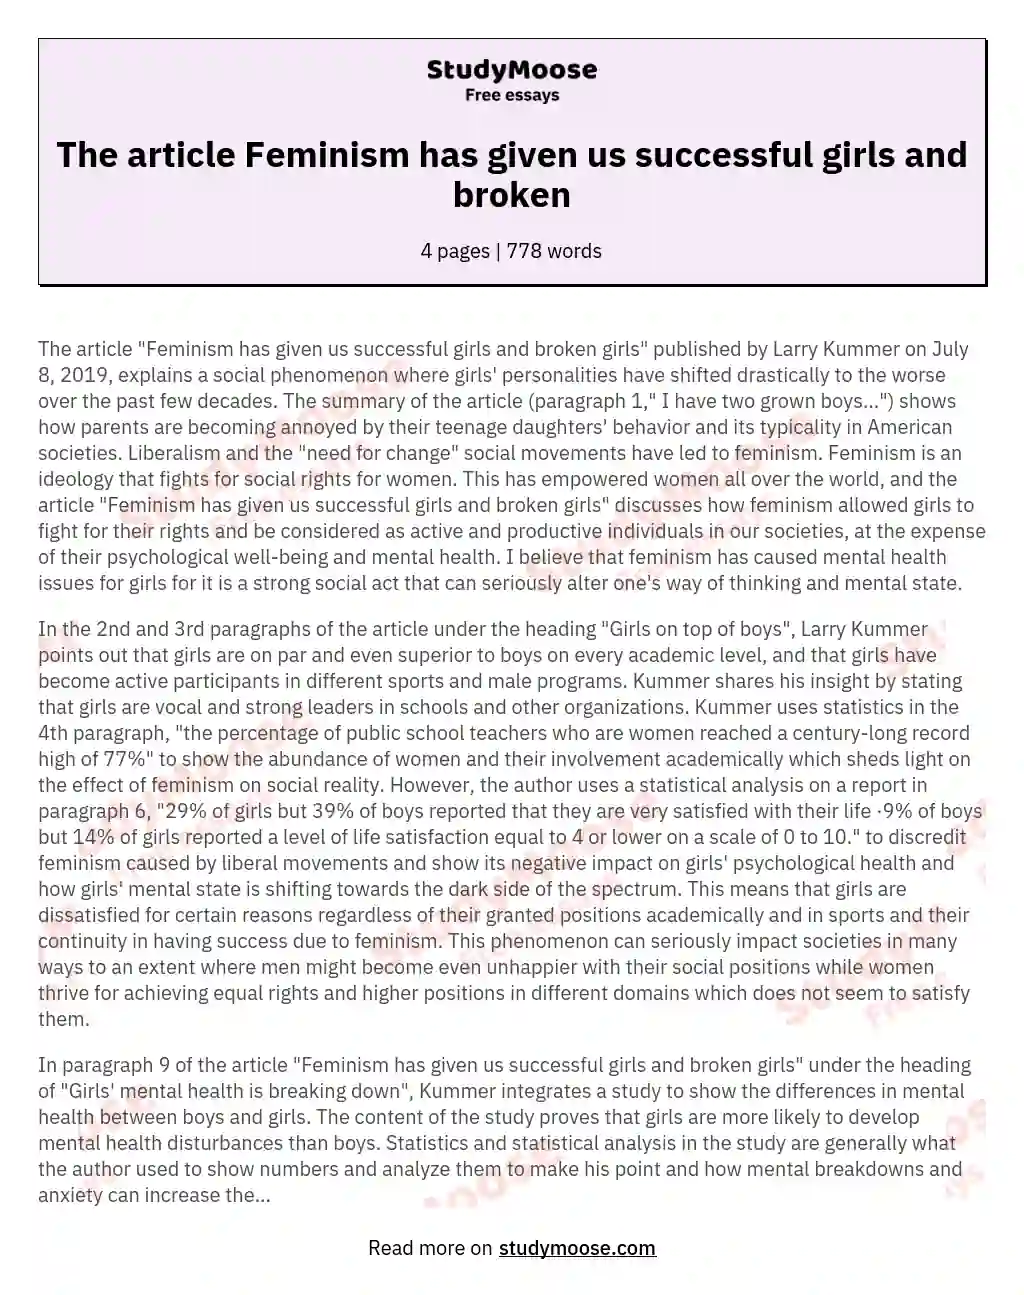 The article Feminism has given us successful girls and broken